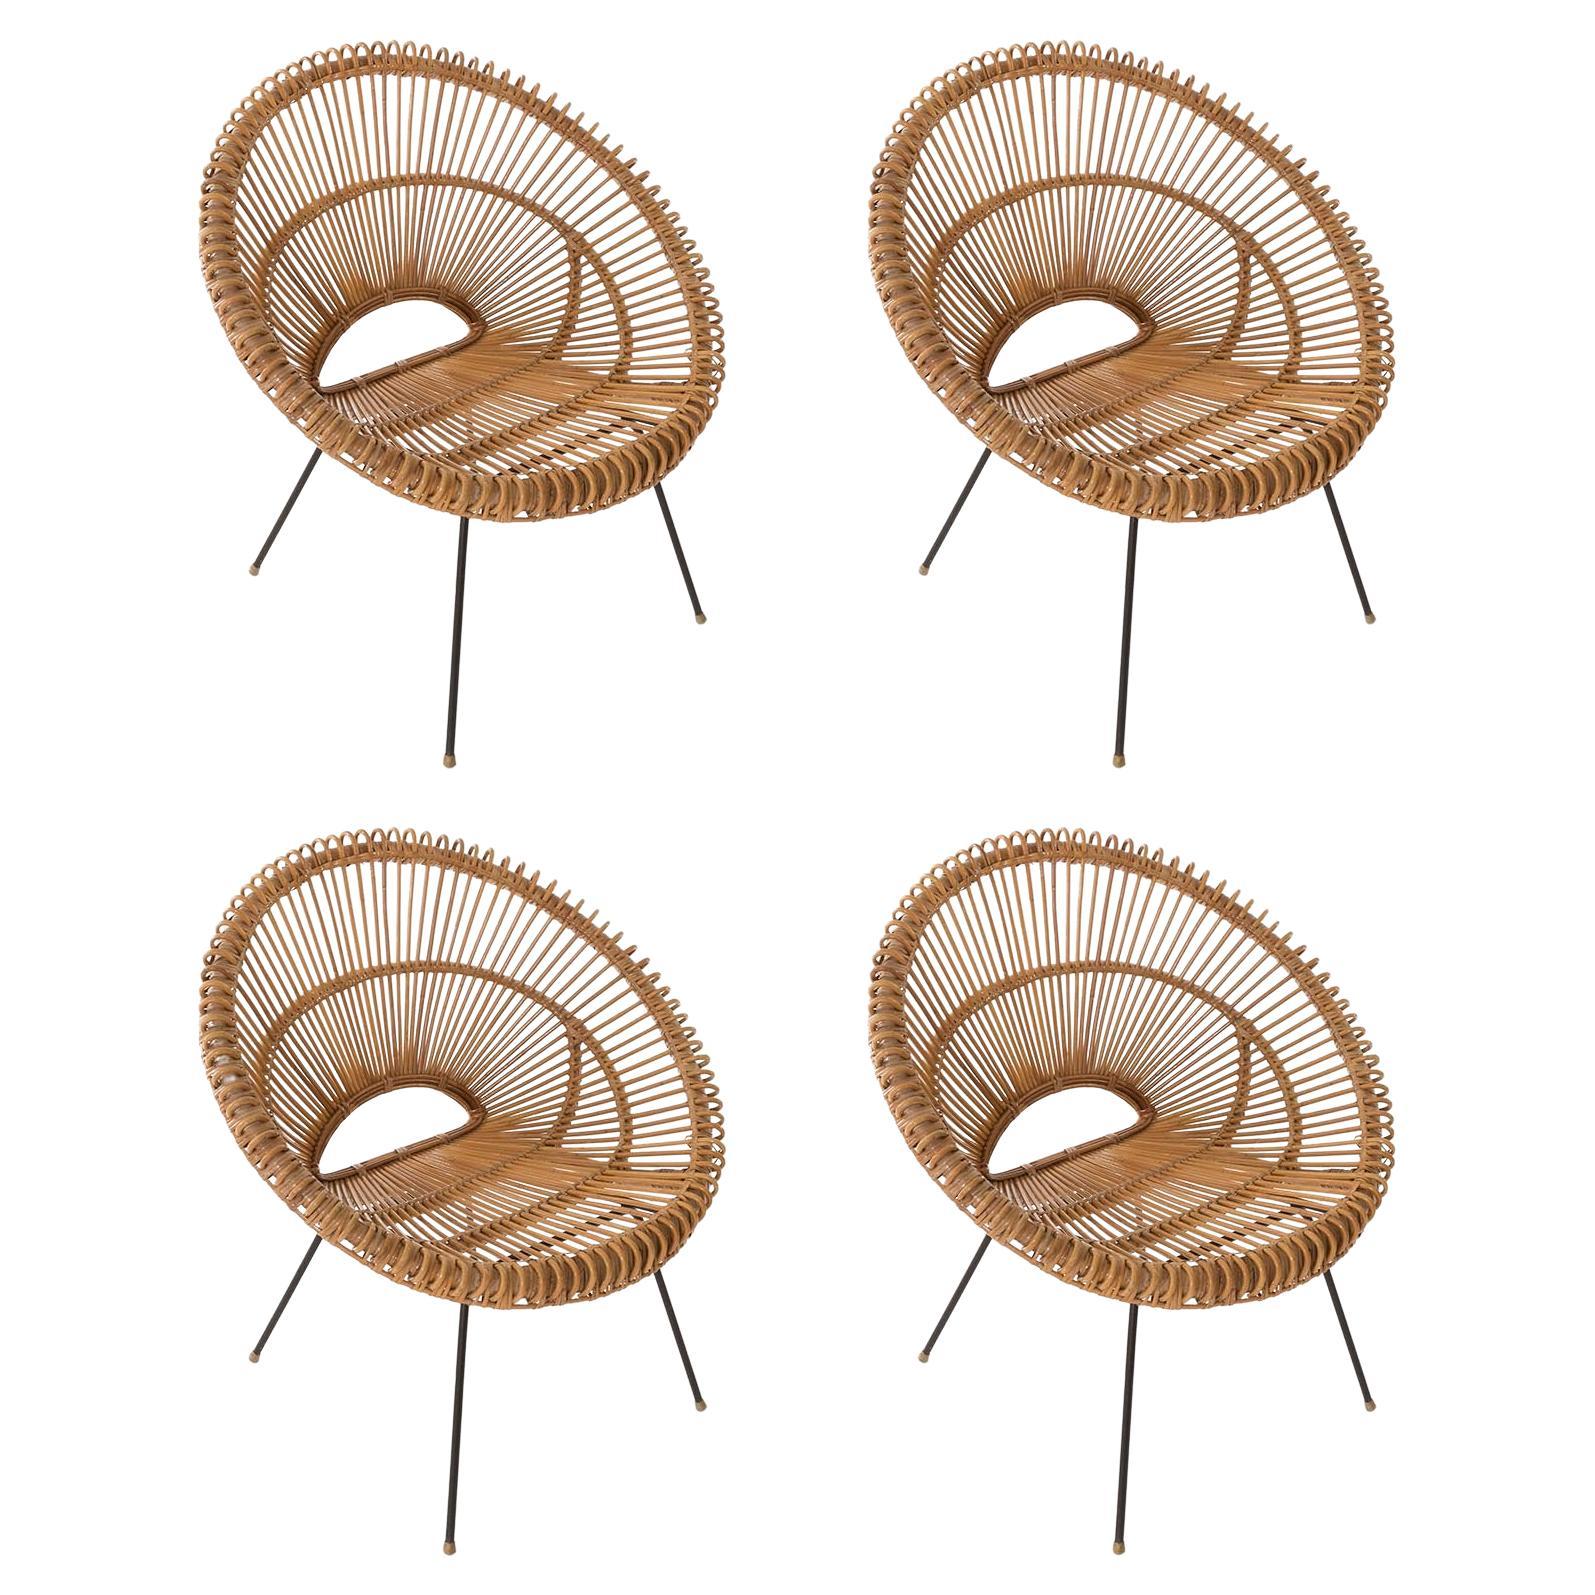 Set Four Mid-Century Modern Rattan Bamboo Chairs, Janine Abraham, Dirk Rol, 1960 For Sale